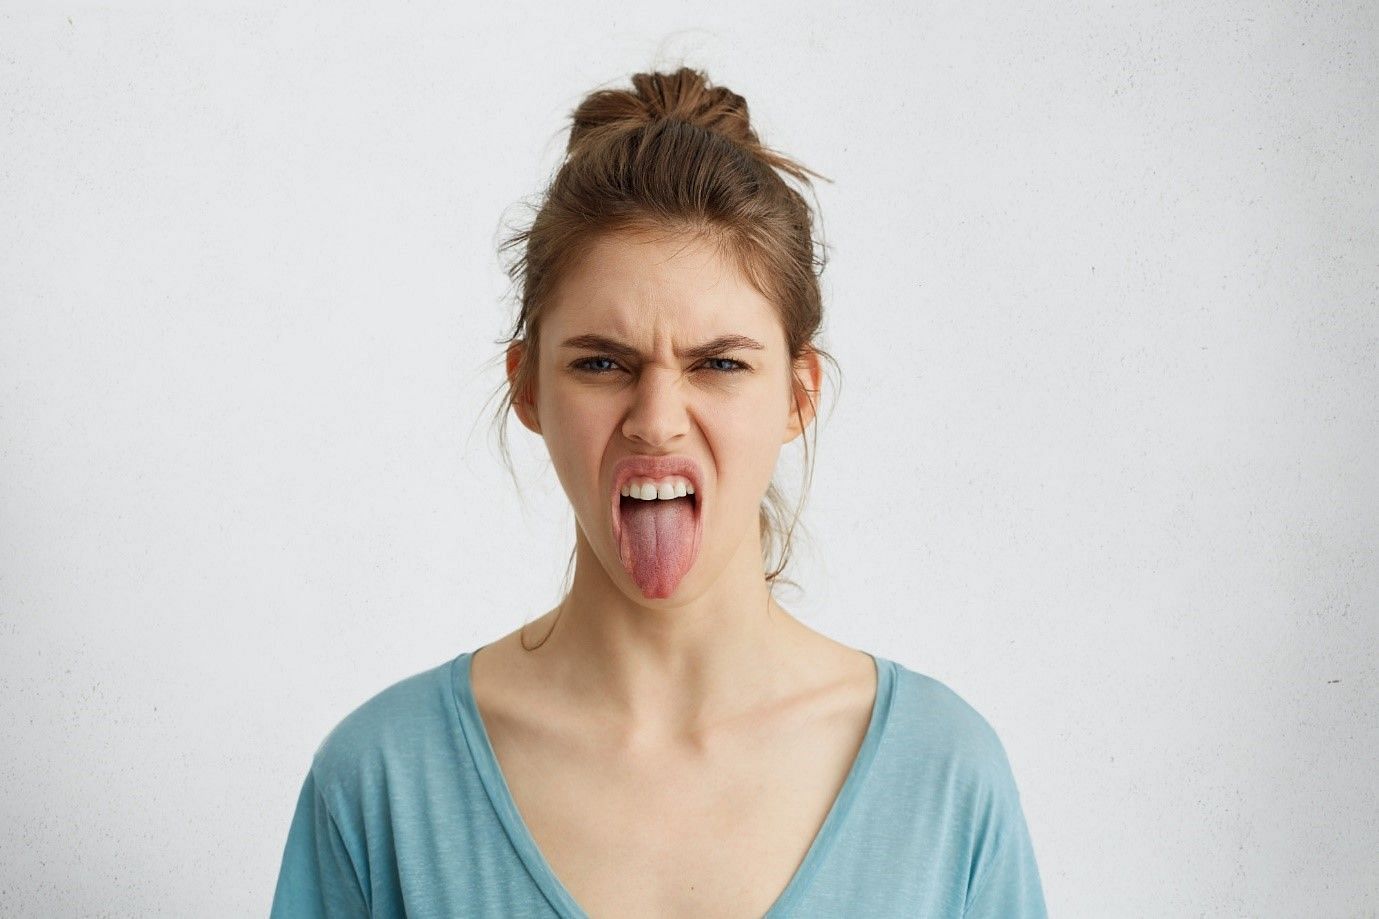 Pimples on tongue are also commonly known by the name of Mouth Ulcers (Image by Wayhomestudio on Freepik)